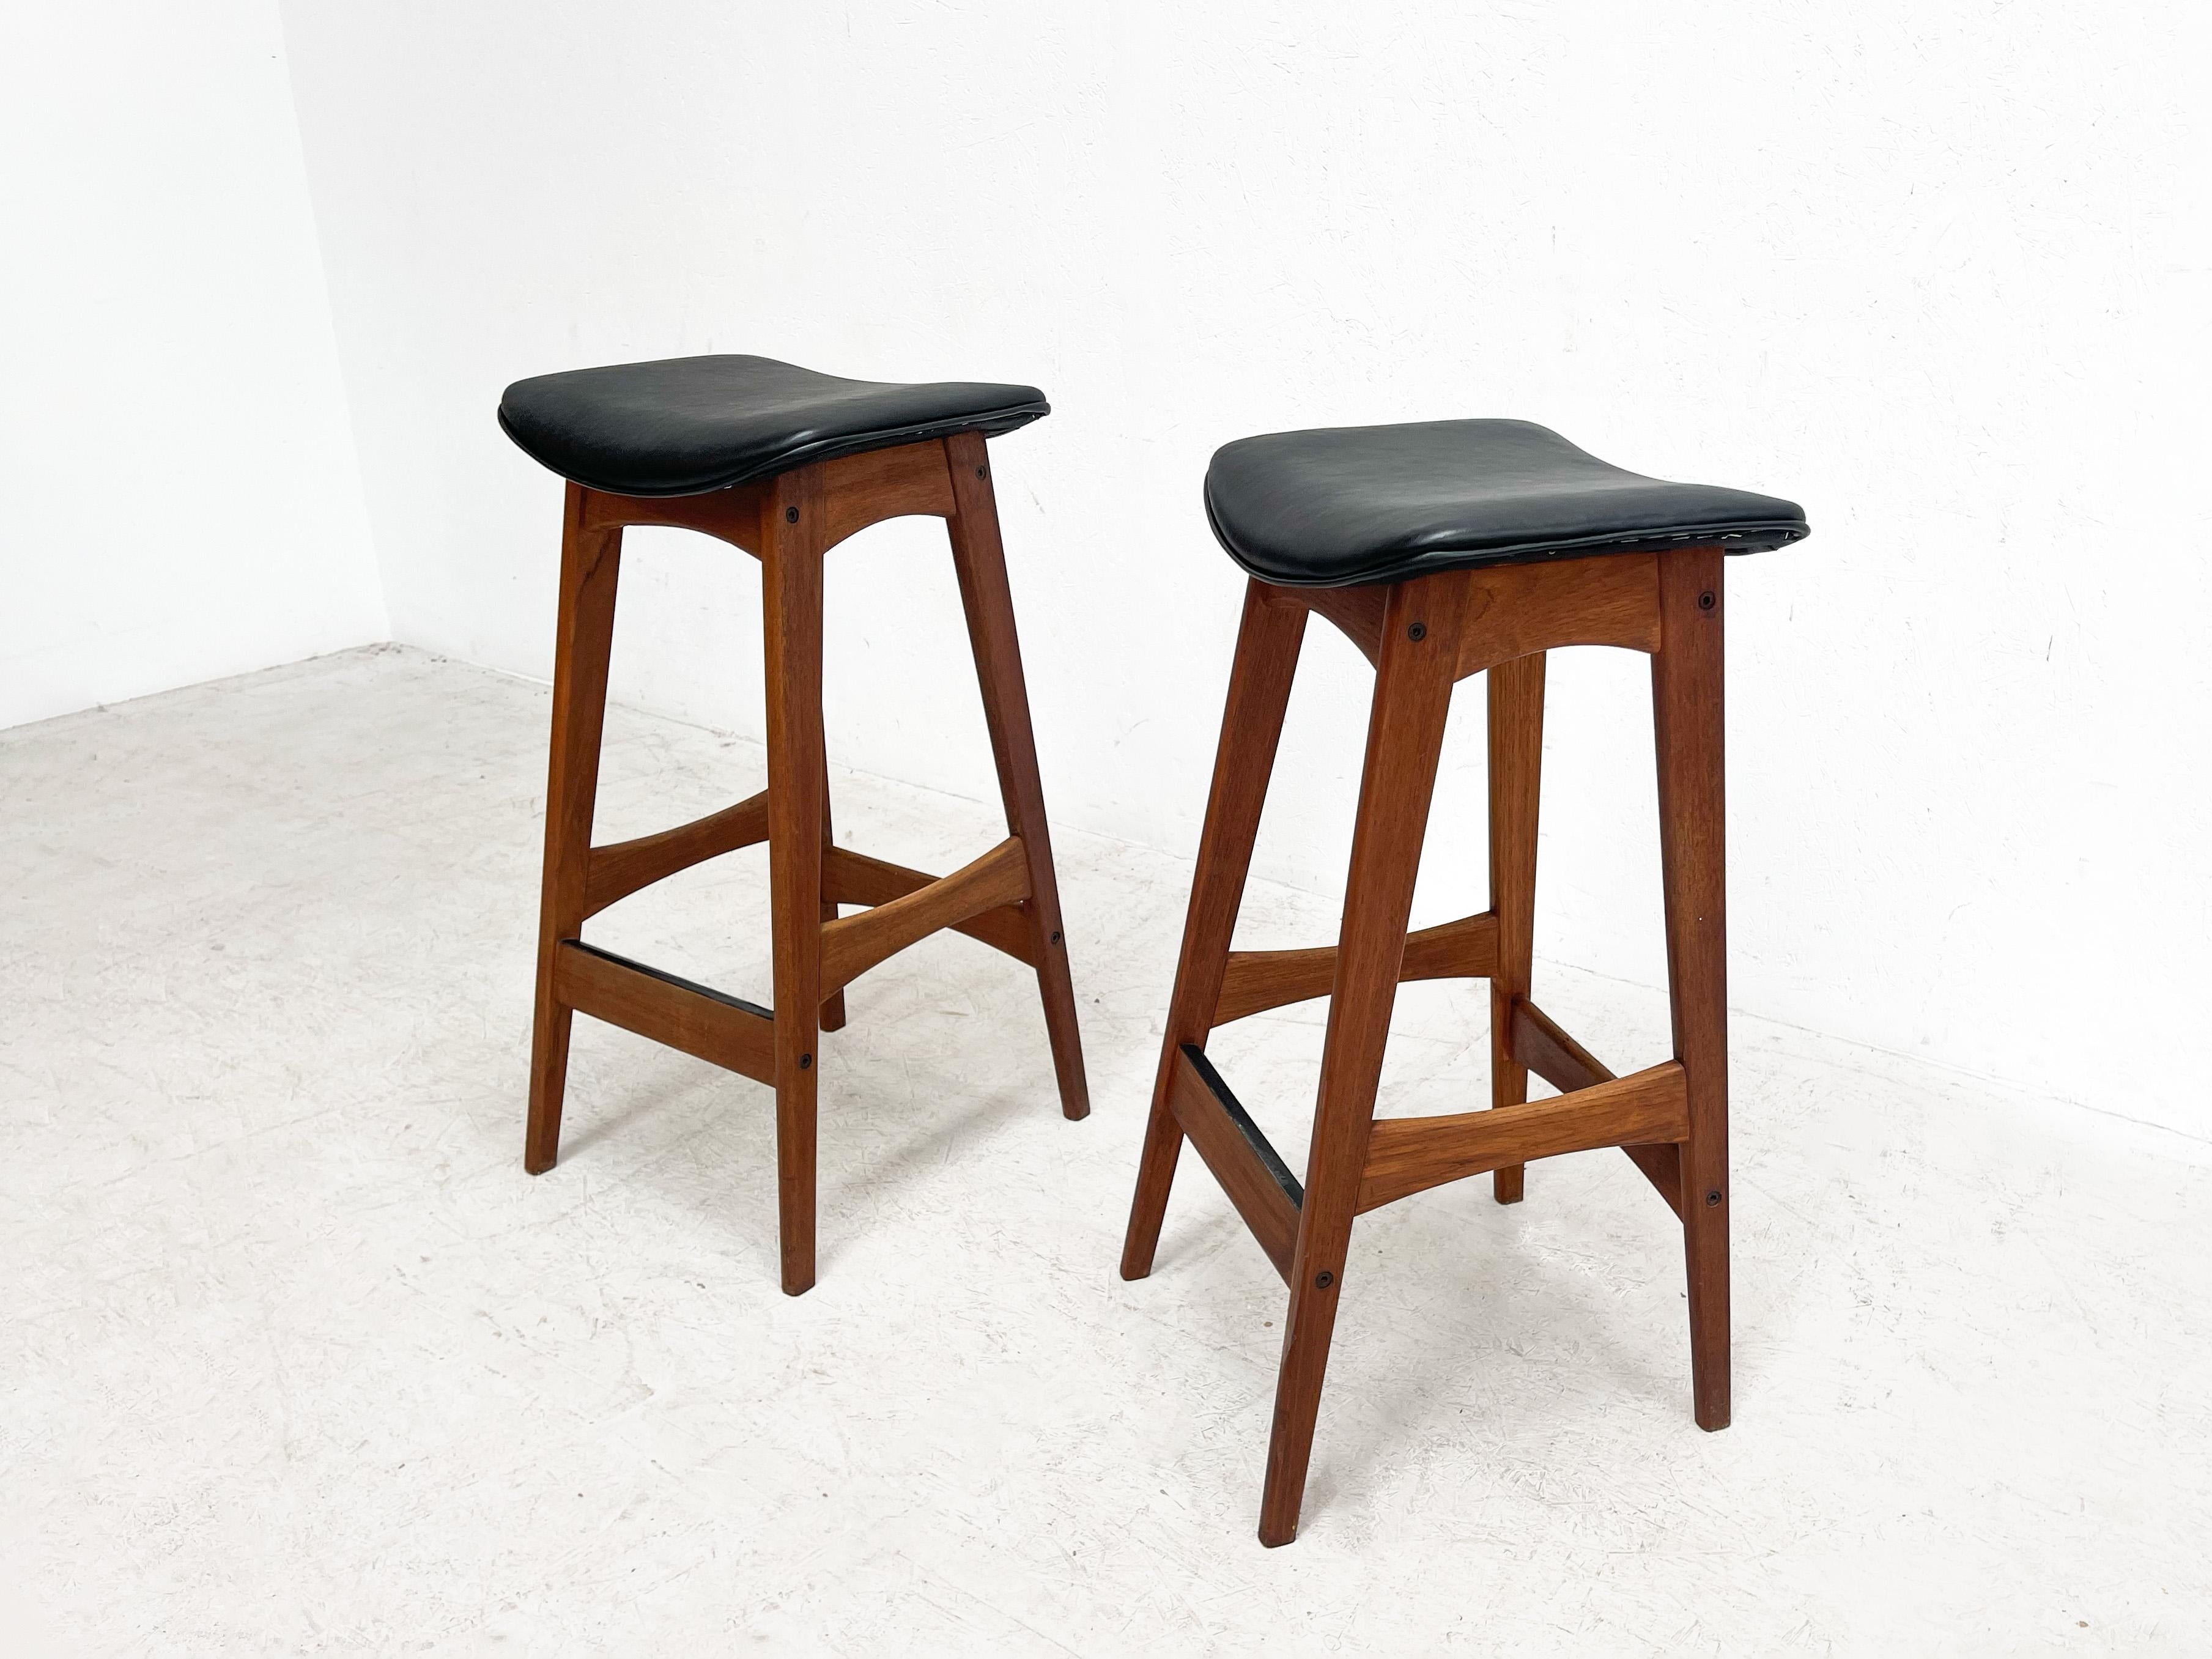 A rare pair of Danish bar stools. These bar stools were designed by Erik Buch in the 1960s foor Dyrlund. Erik Buch is best known for the bar stools with higher back. These are rarer and harder to come by.
 
The bar stools are in very good